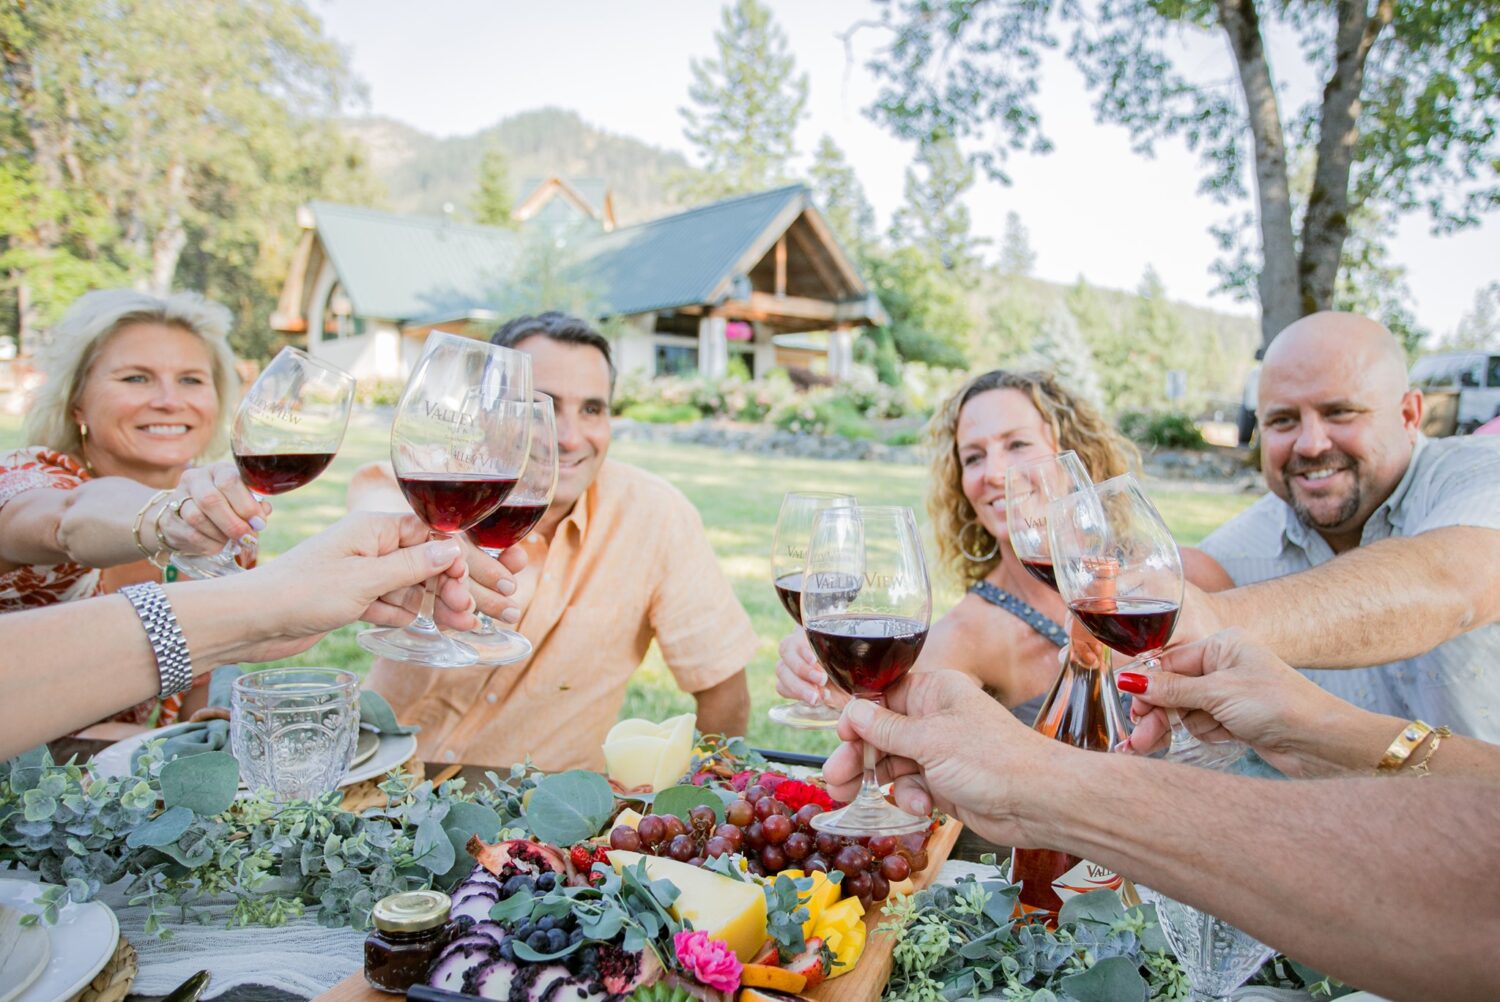 An Overview of Southern Oregon Wine Festivals and Events